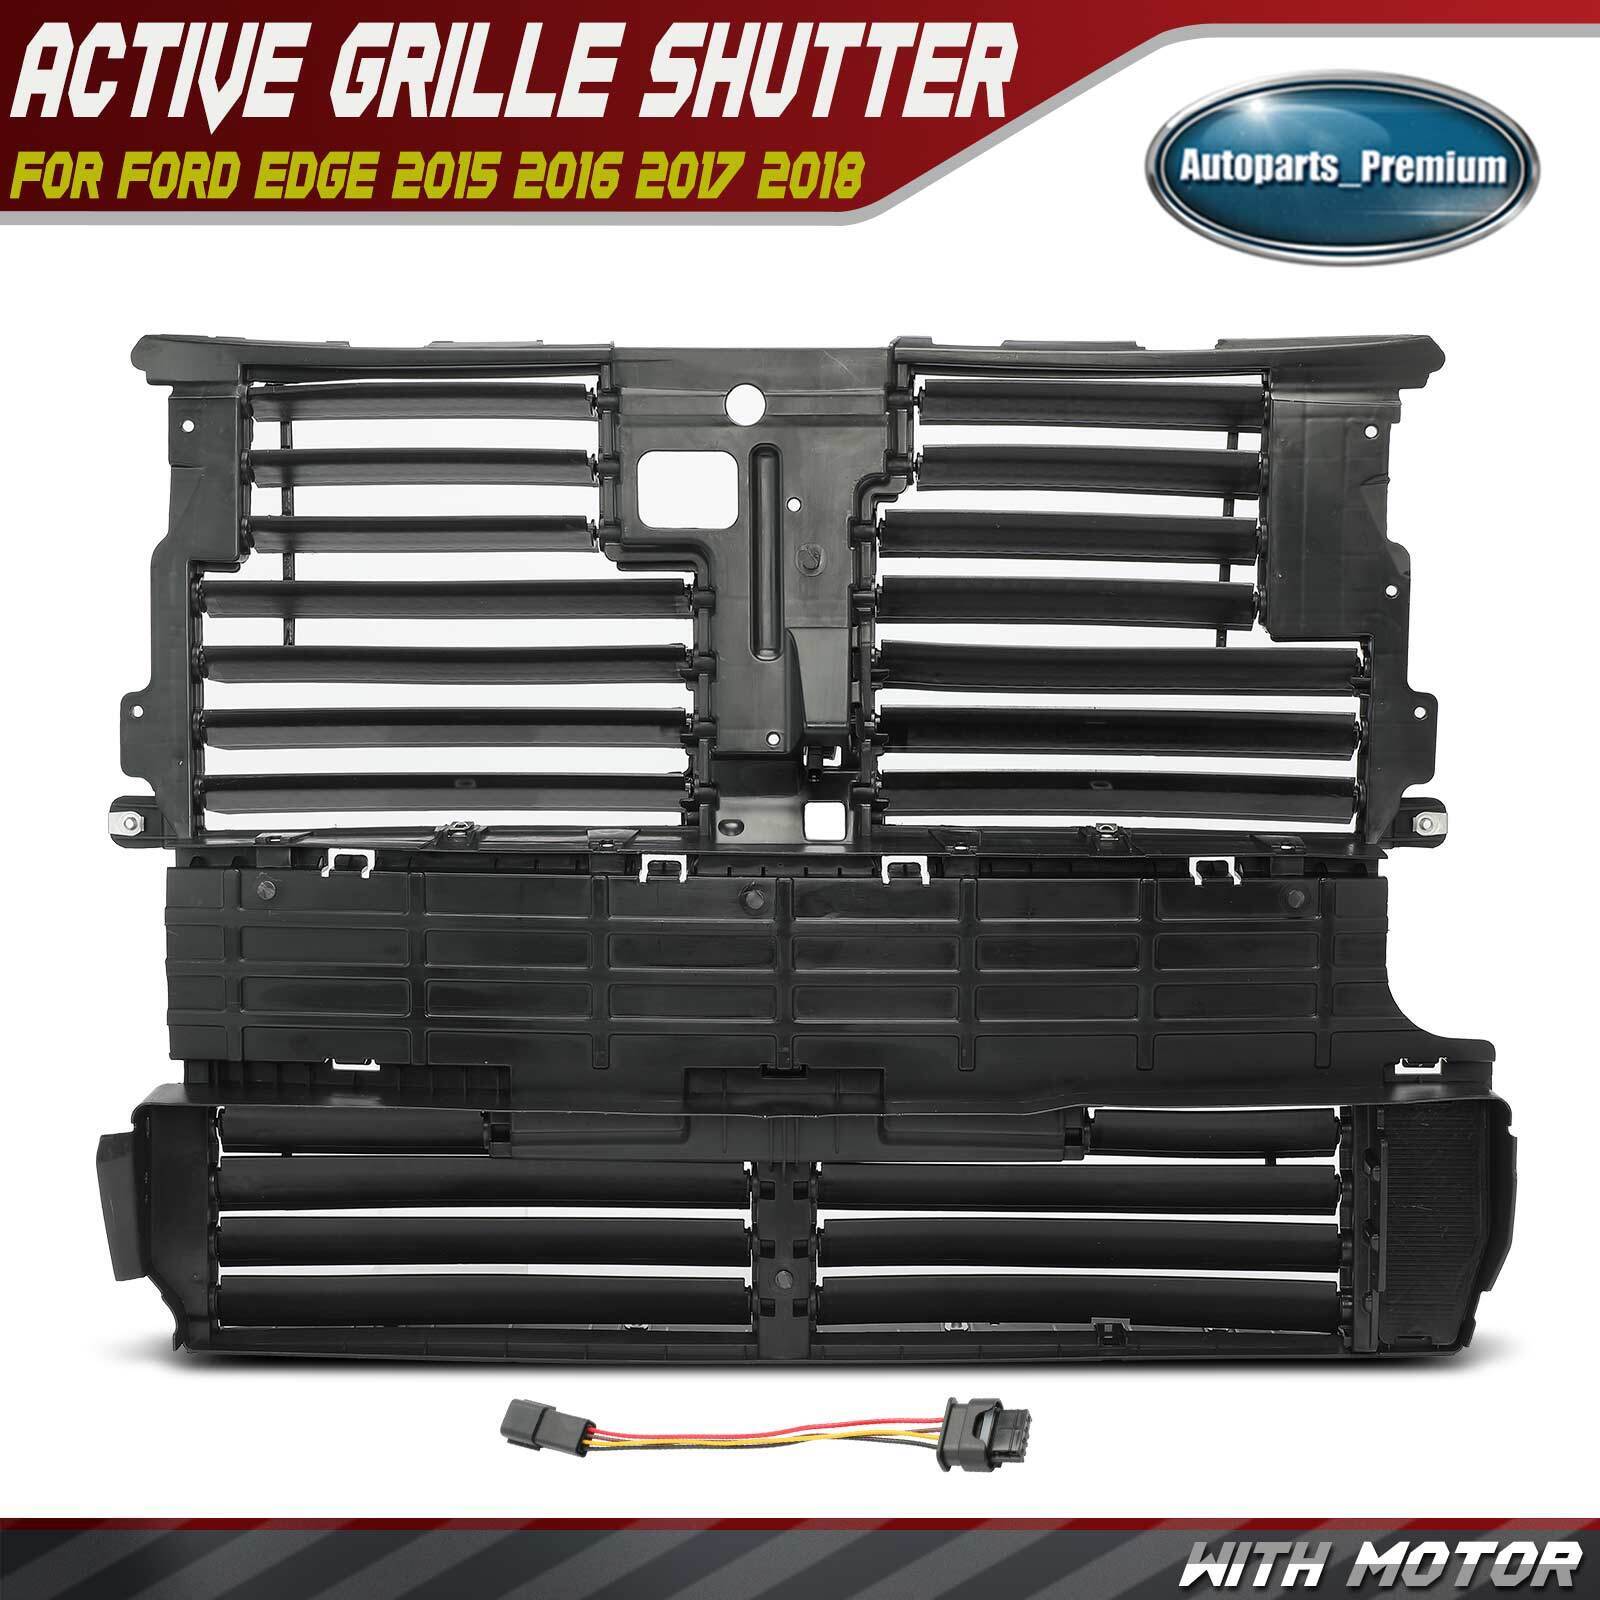 Active Grille Shutter w/ Motor Assembly for Ford Edge 2015 2016 2017 2018 2.0L